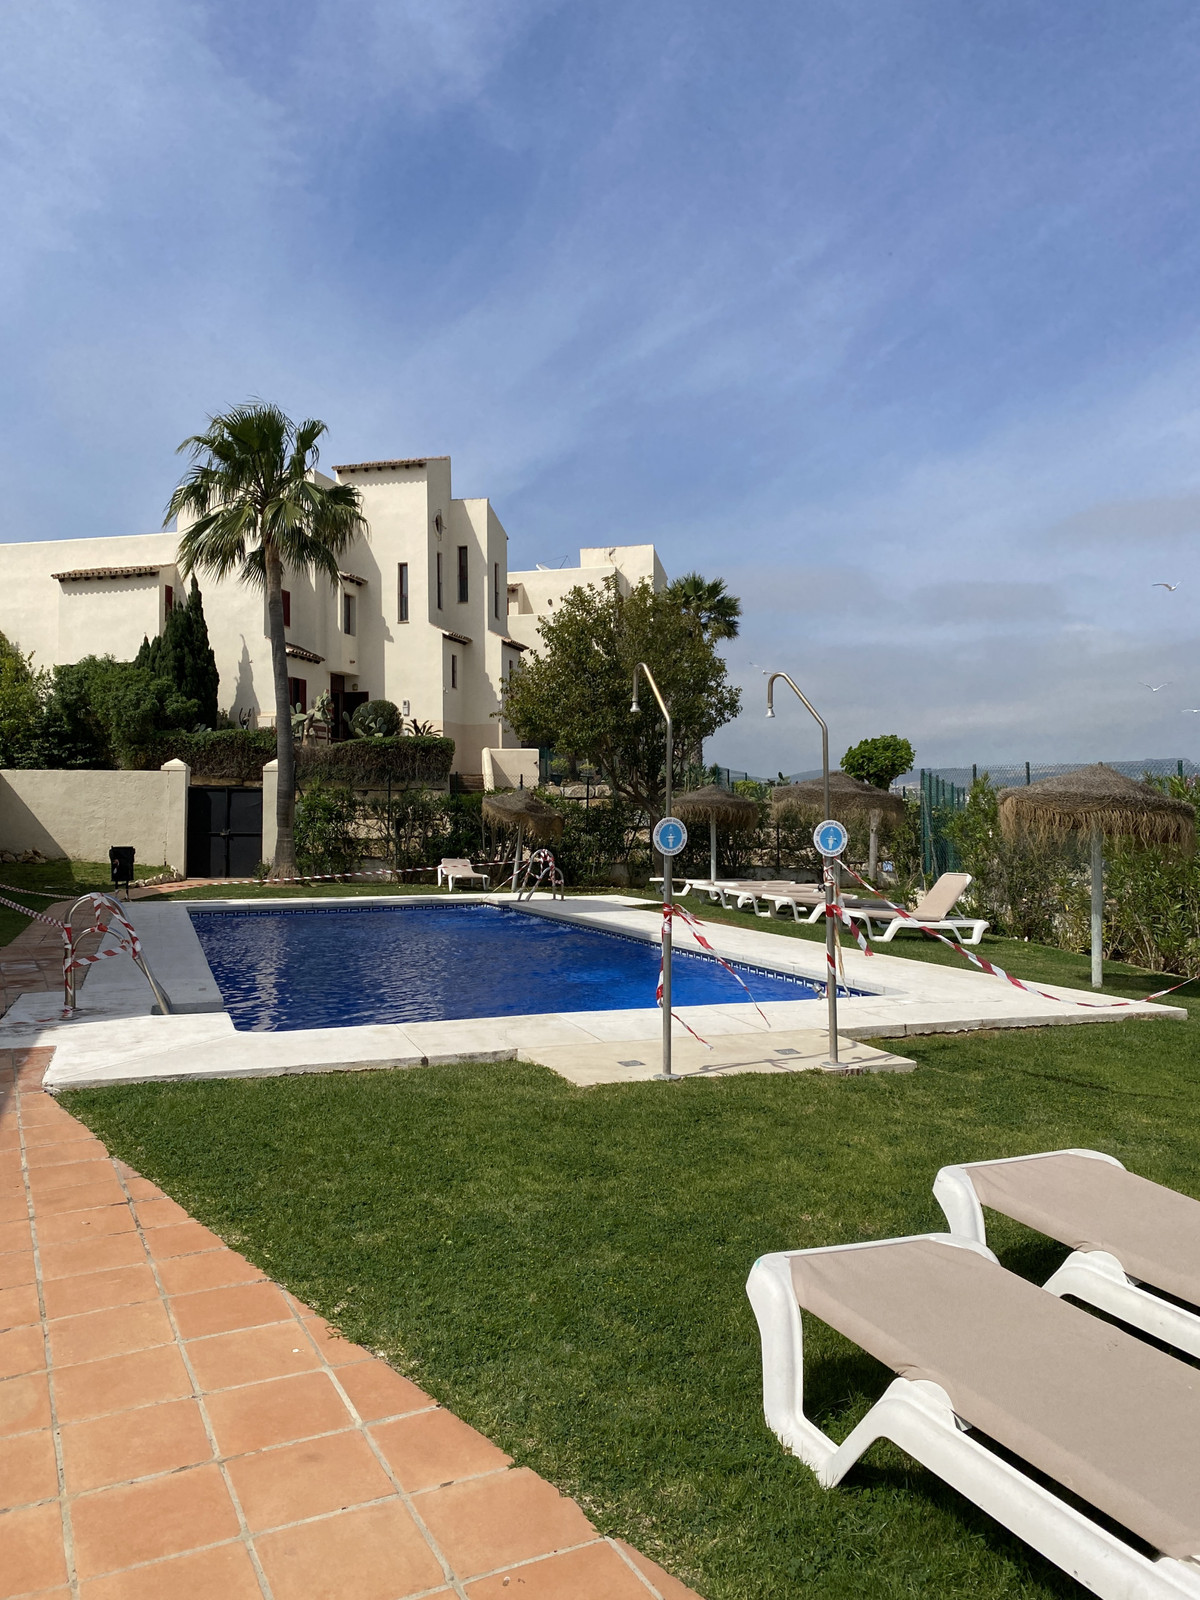 2 bedroom apartment for sale casares